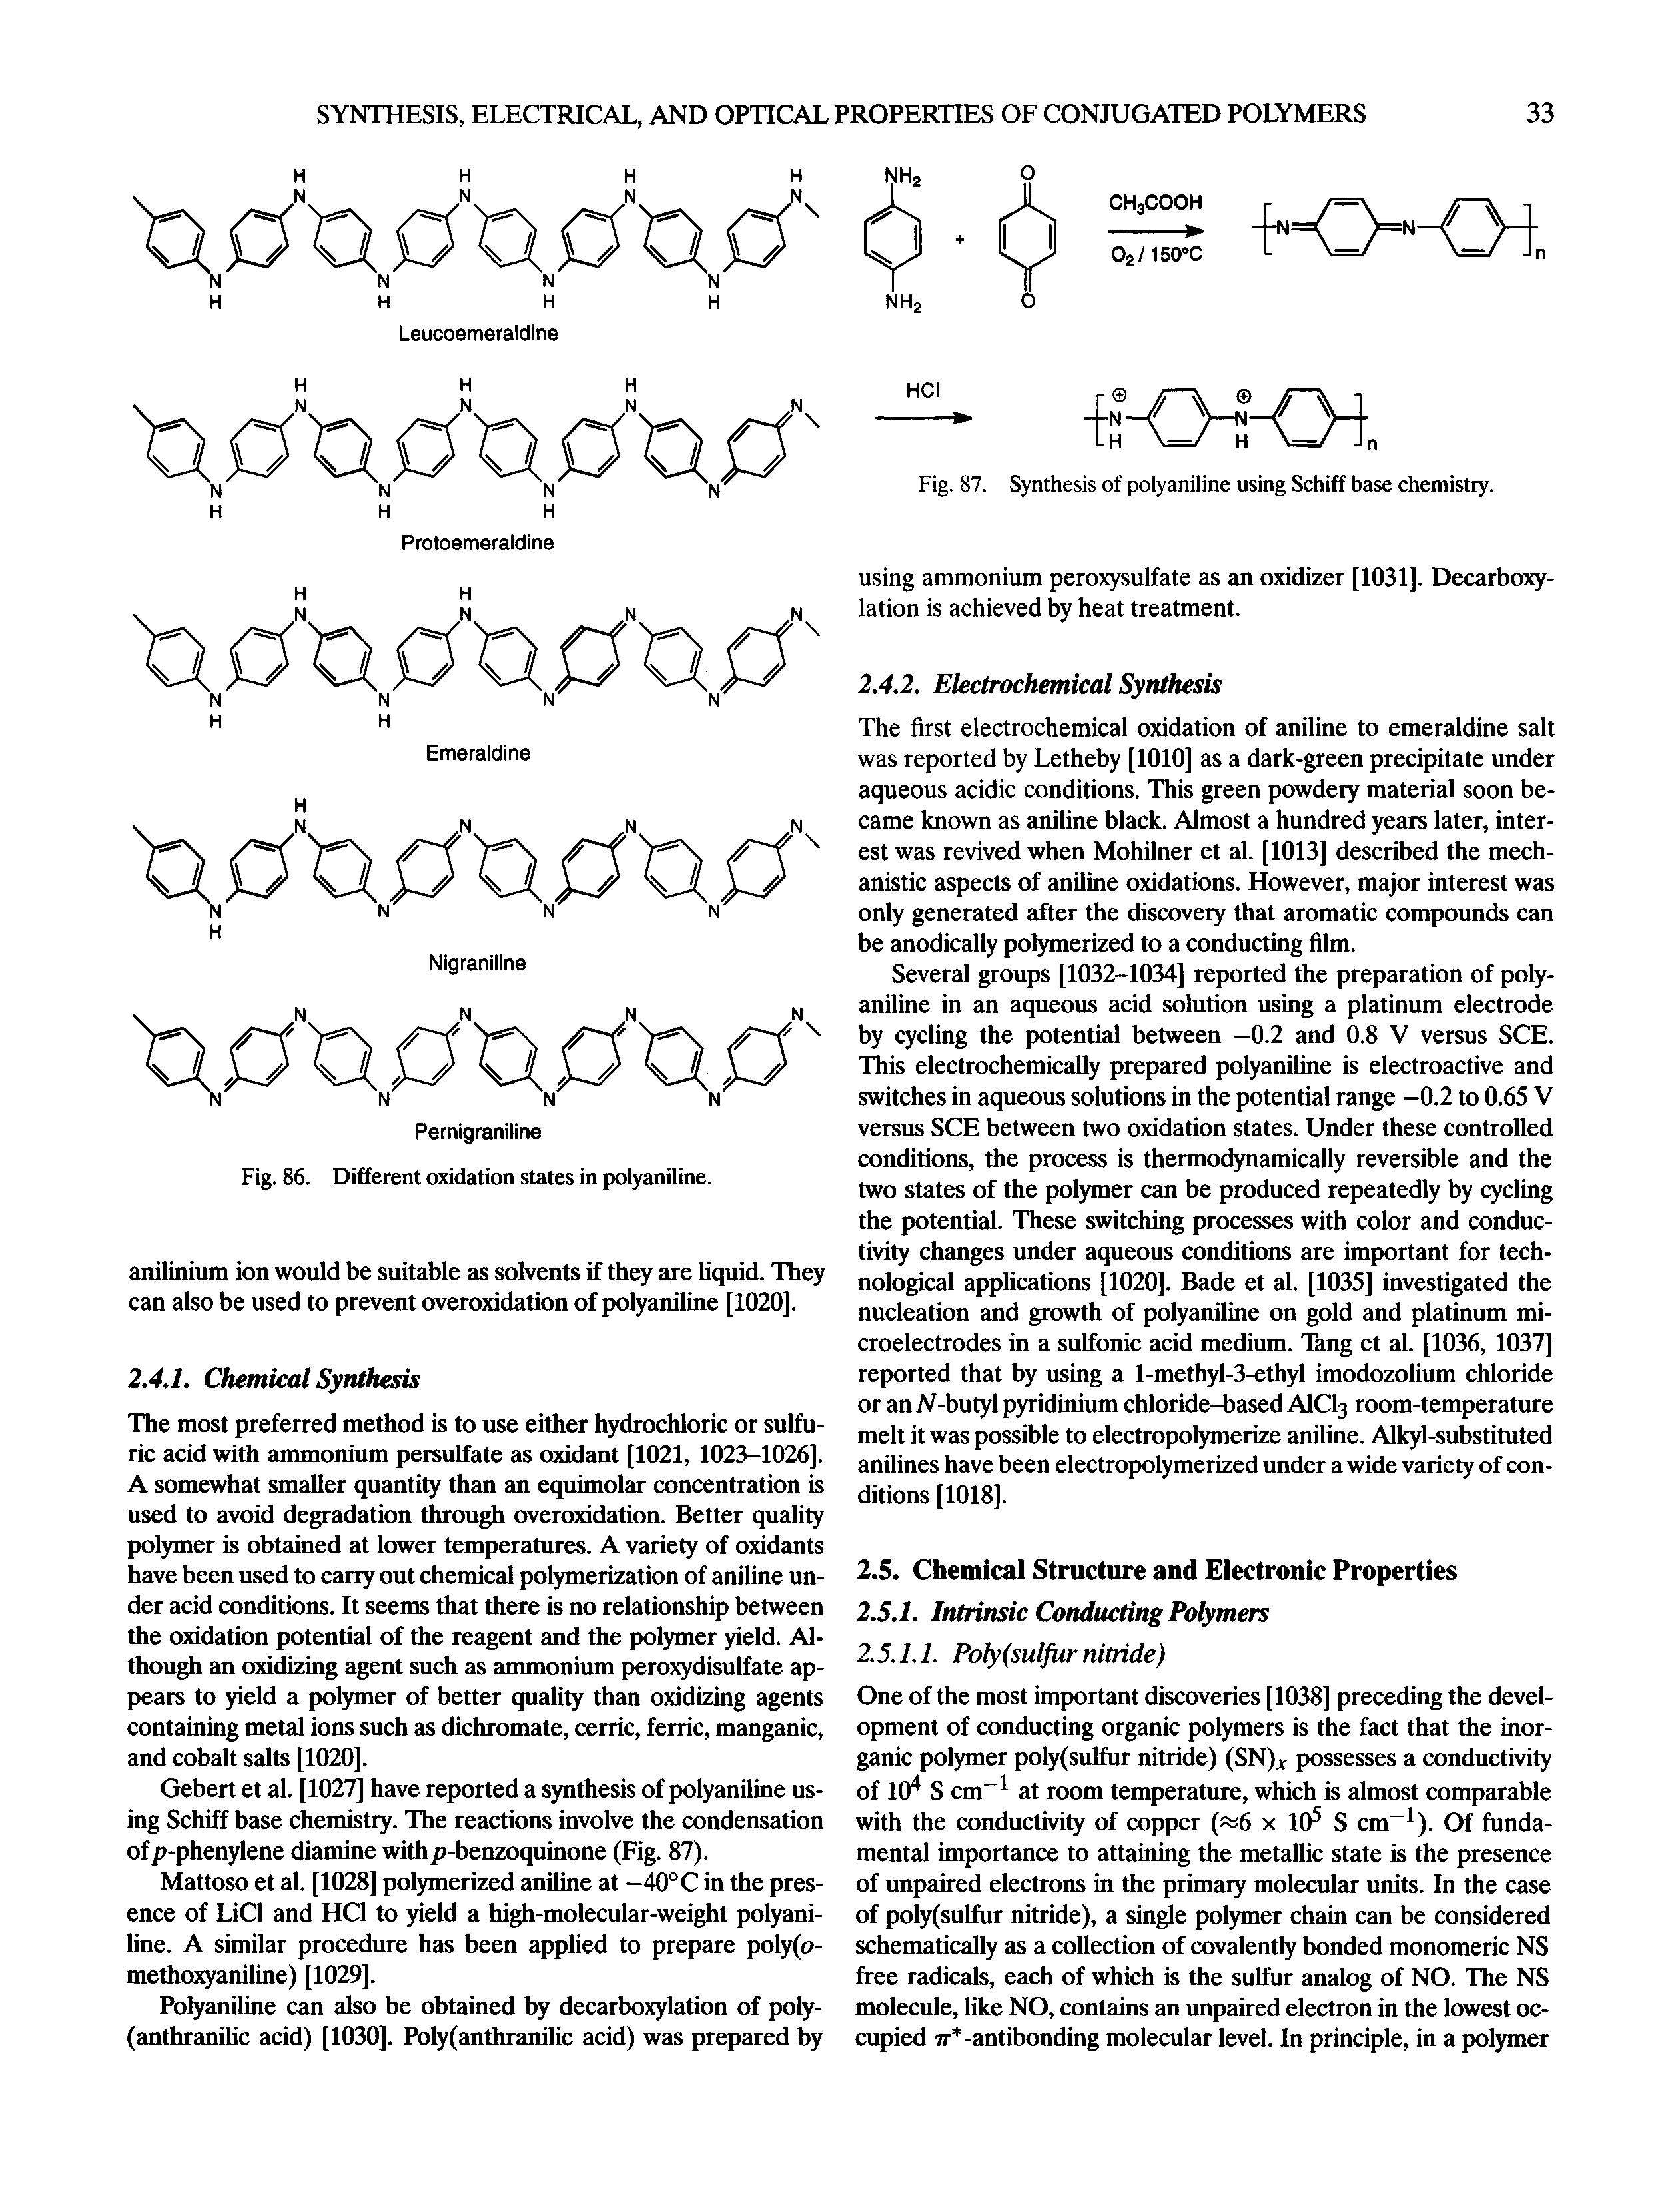 Fig. 87. Synthesis of polyaniline using Schiff base chemistry.